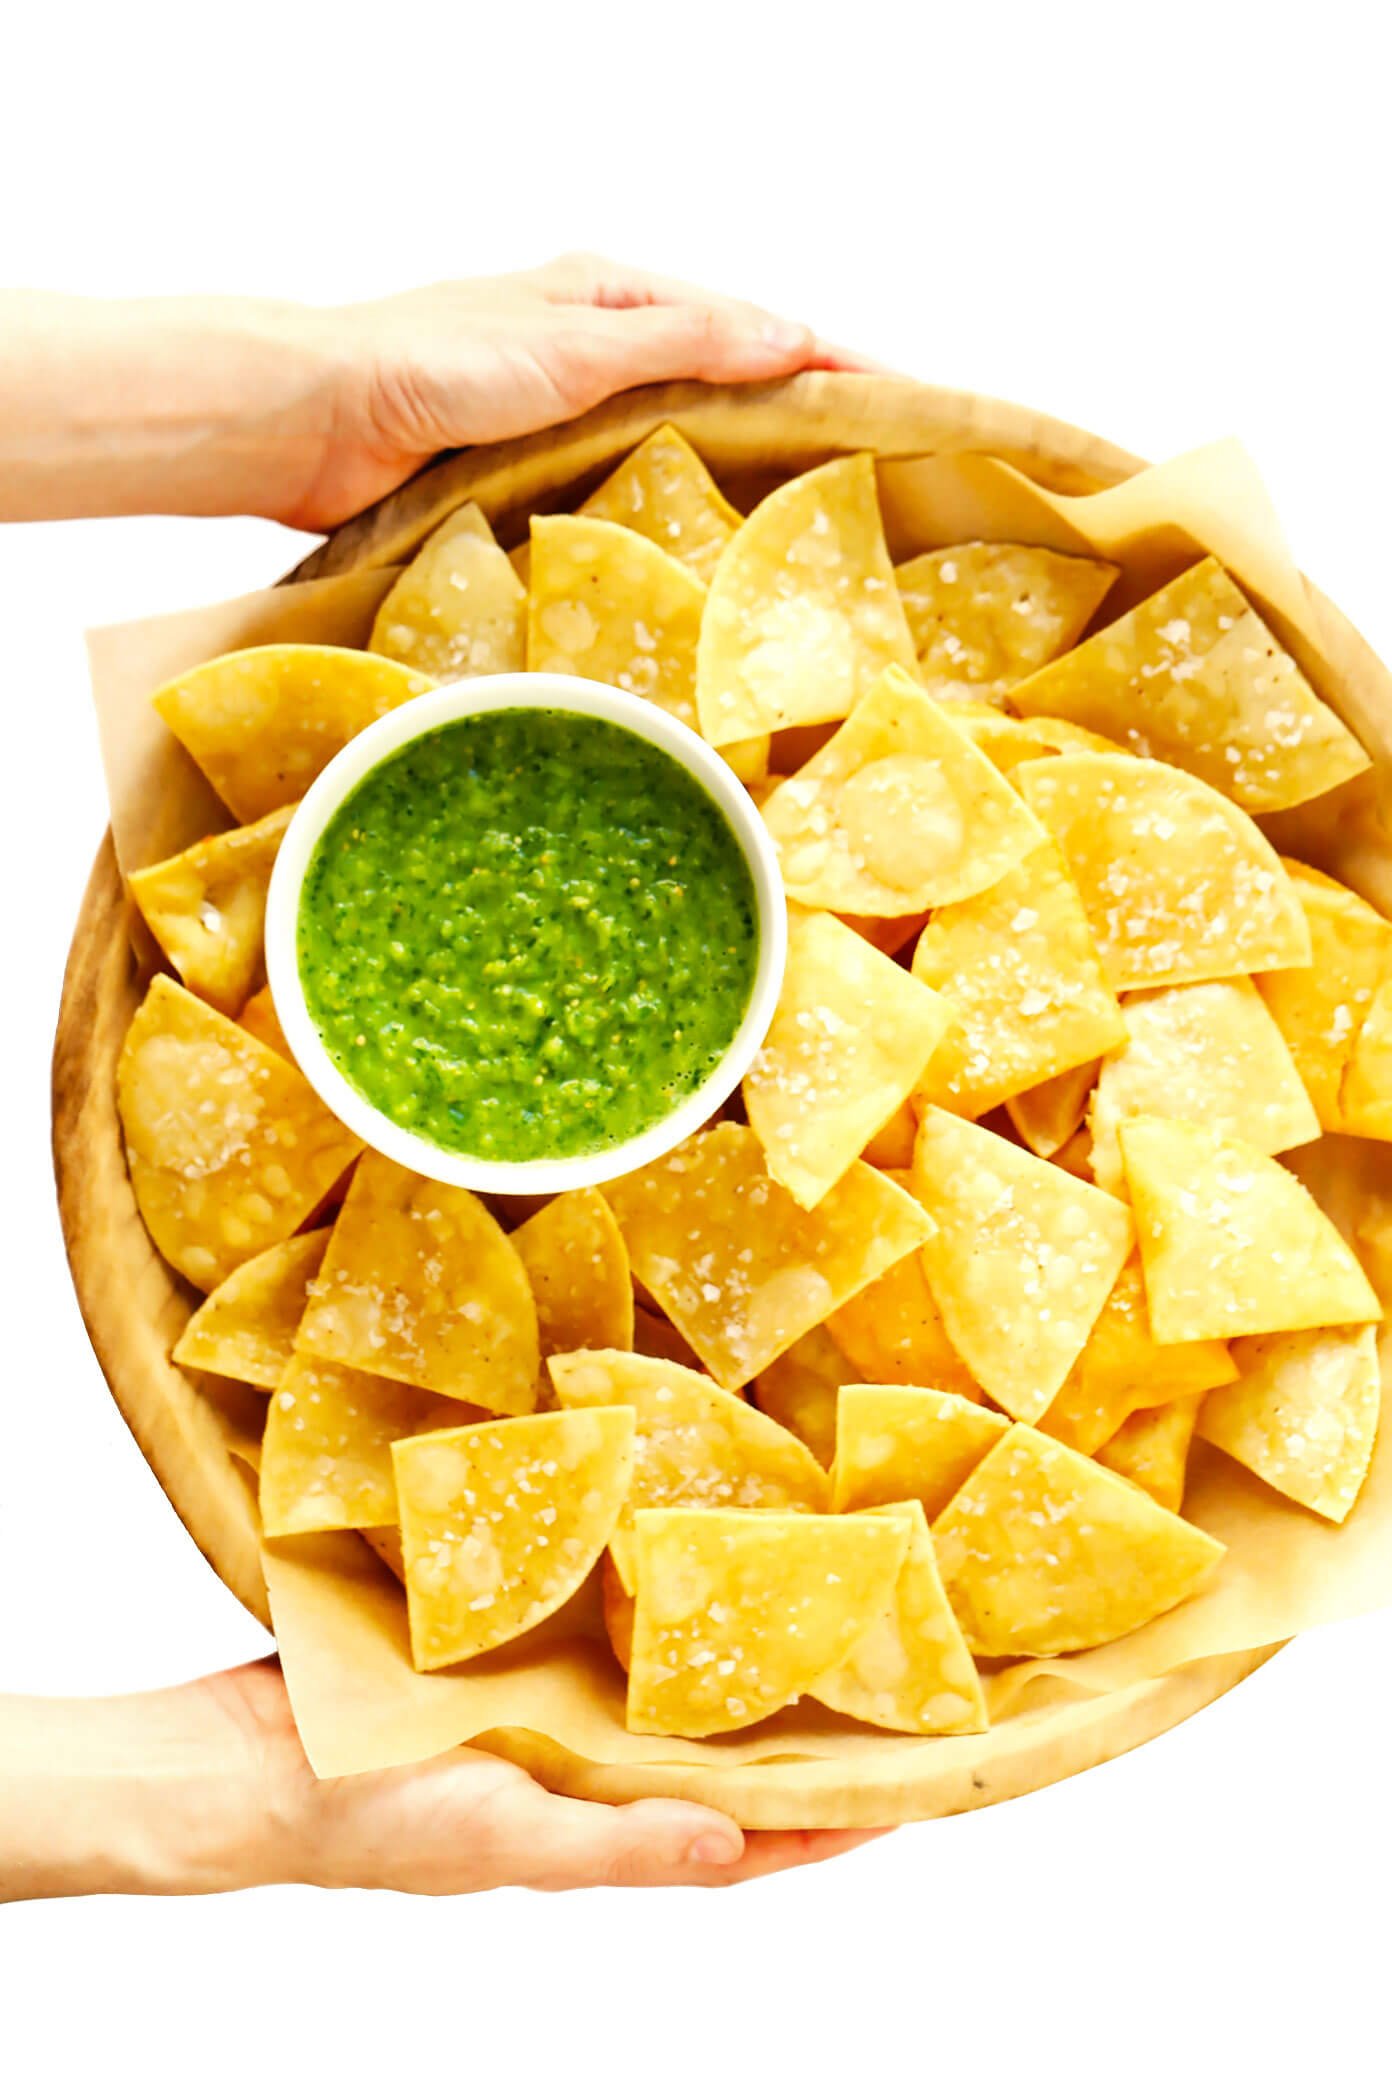 Holding a bowl of Fresh Salsa Verde with Homemade Chips